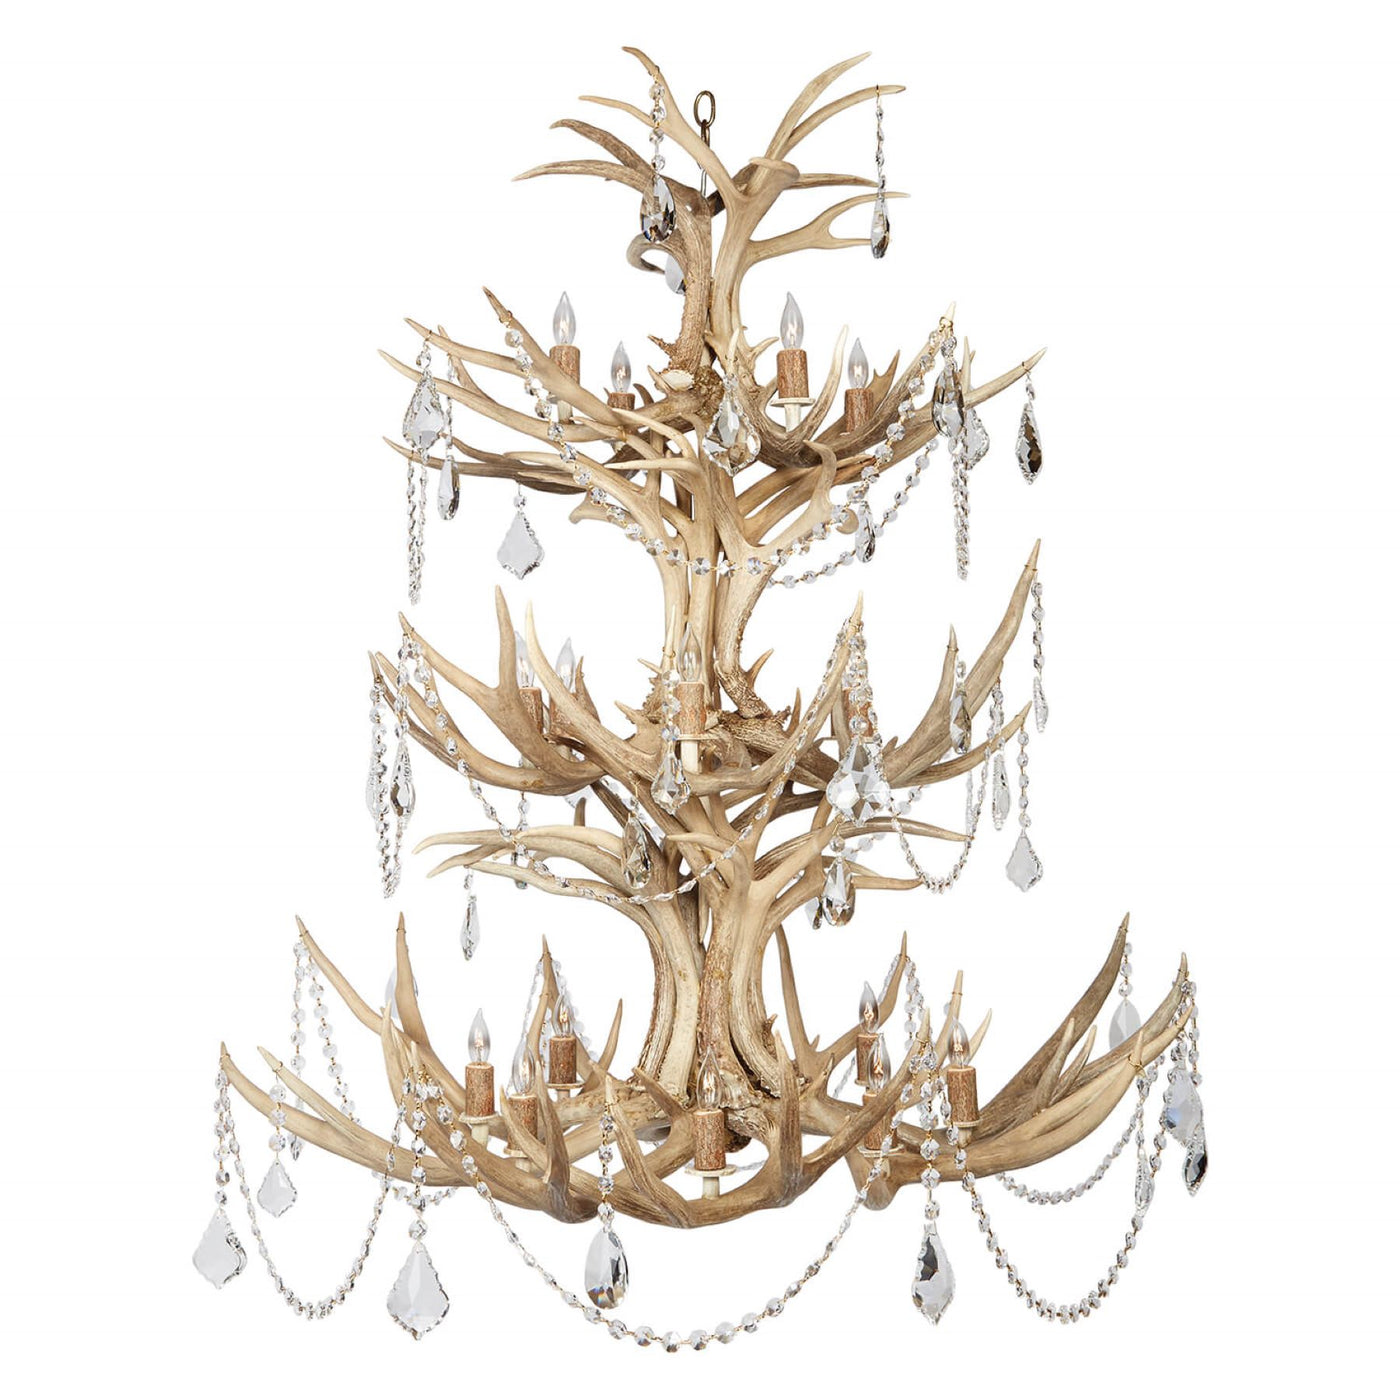 Majestic Antler Chandelier with Crystals